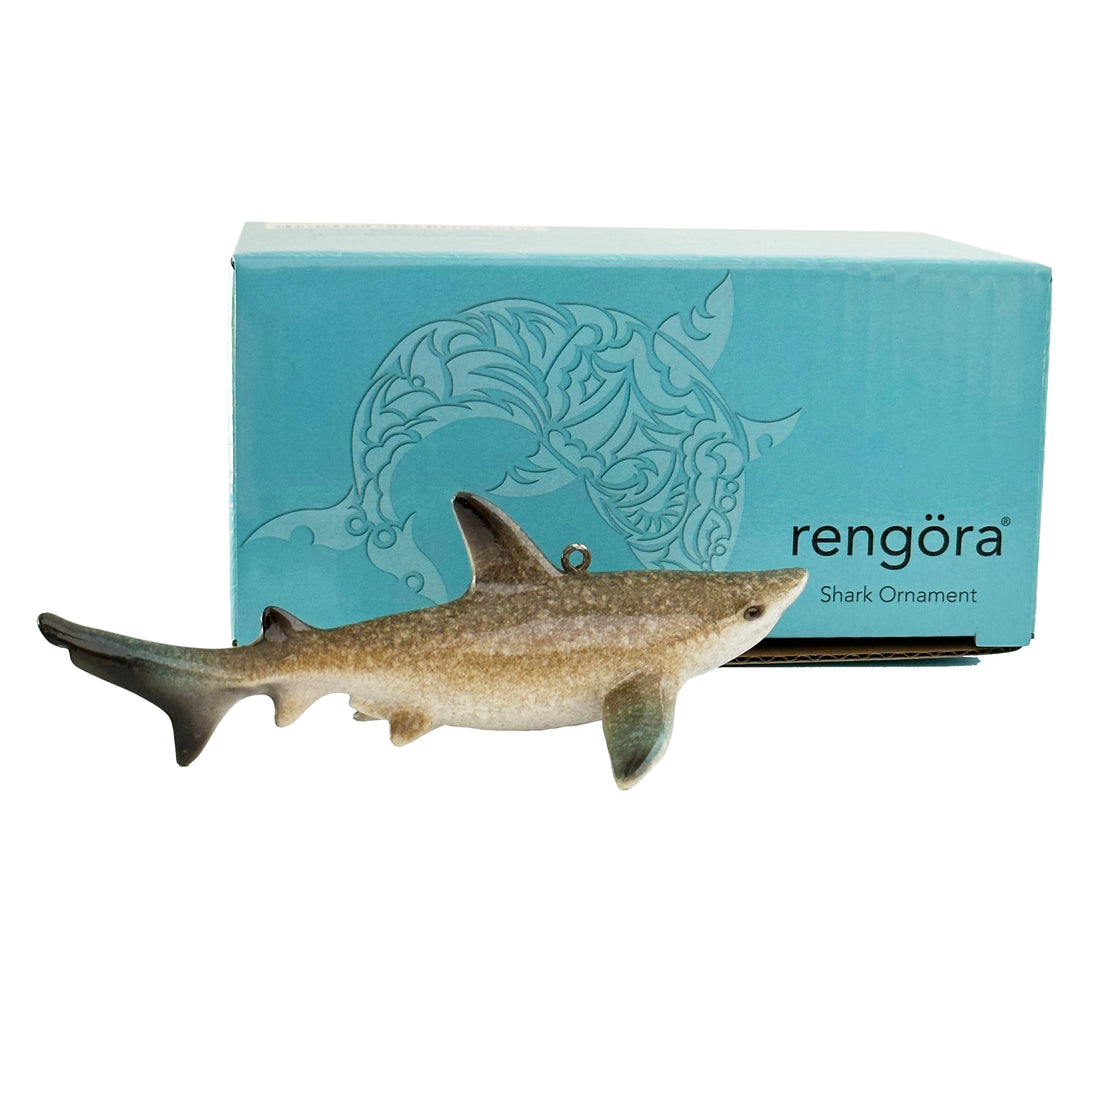 A side view of the rengöra shark ornament is displayed, revealing its packaging in the background against a plain white backdrop